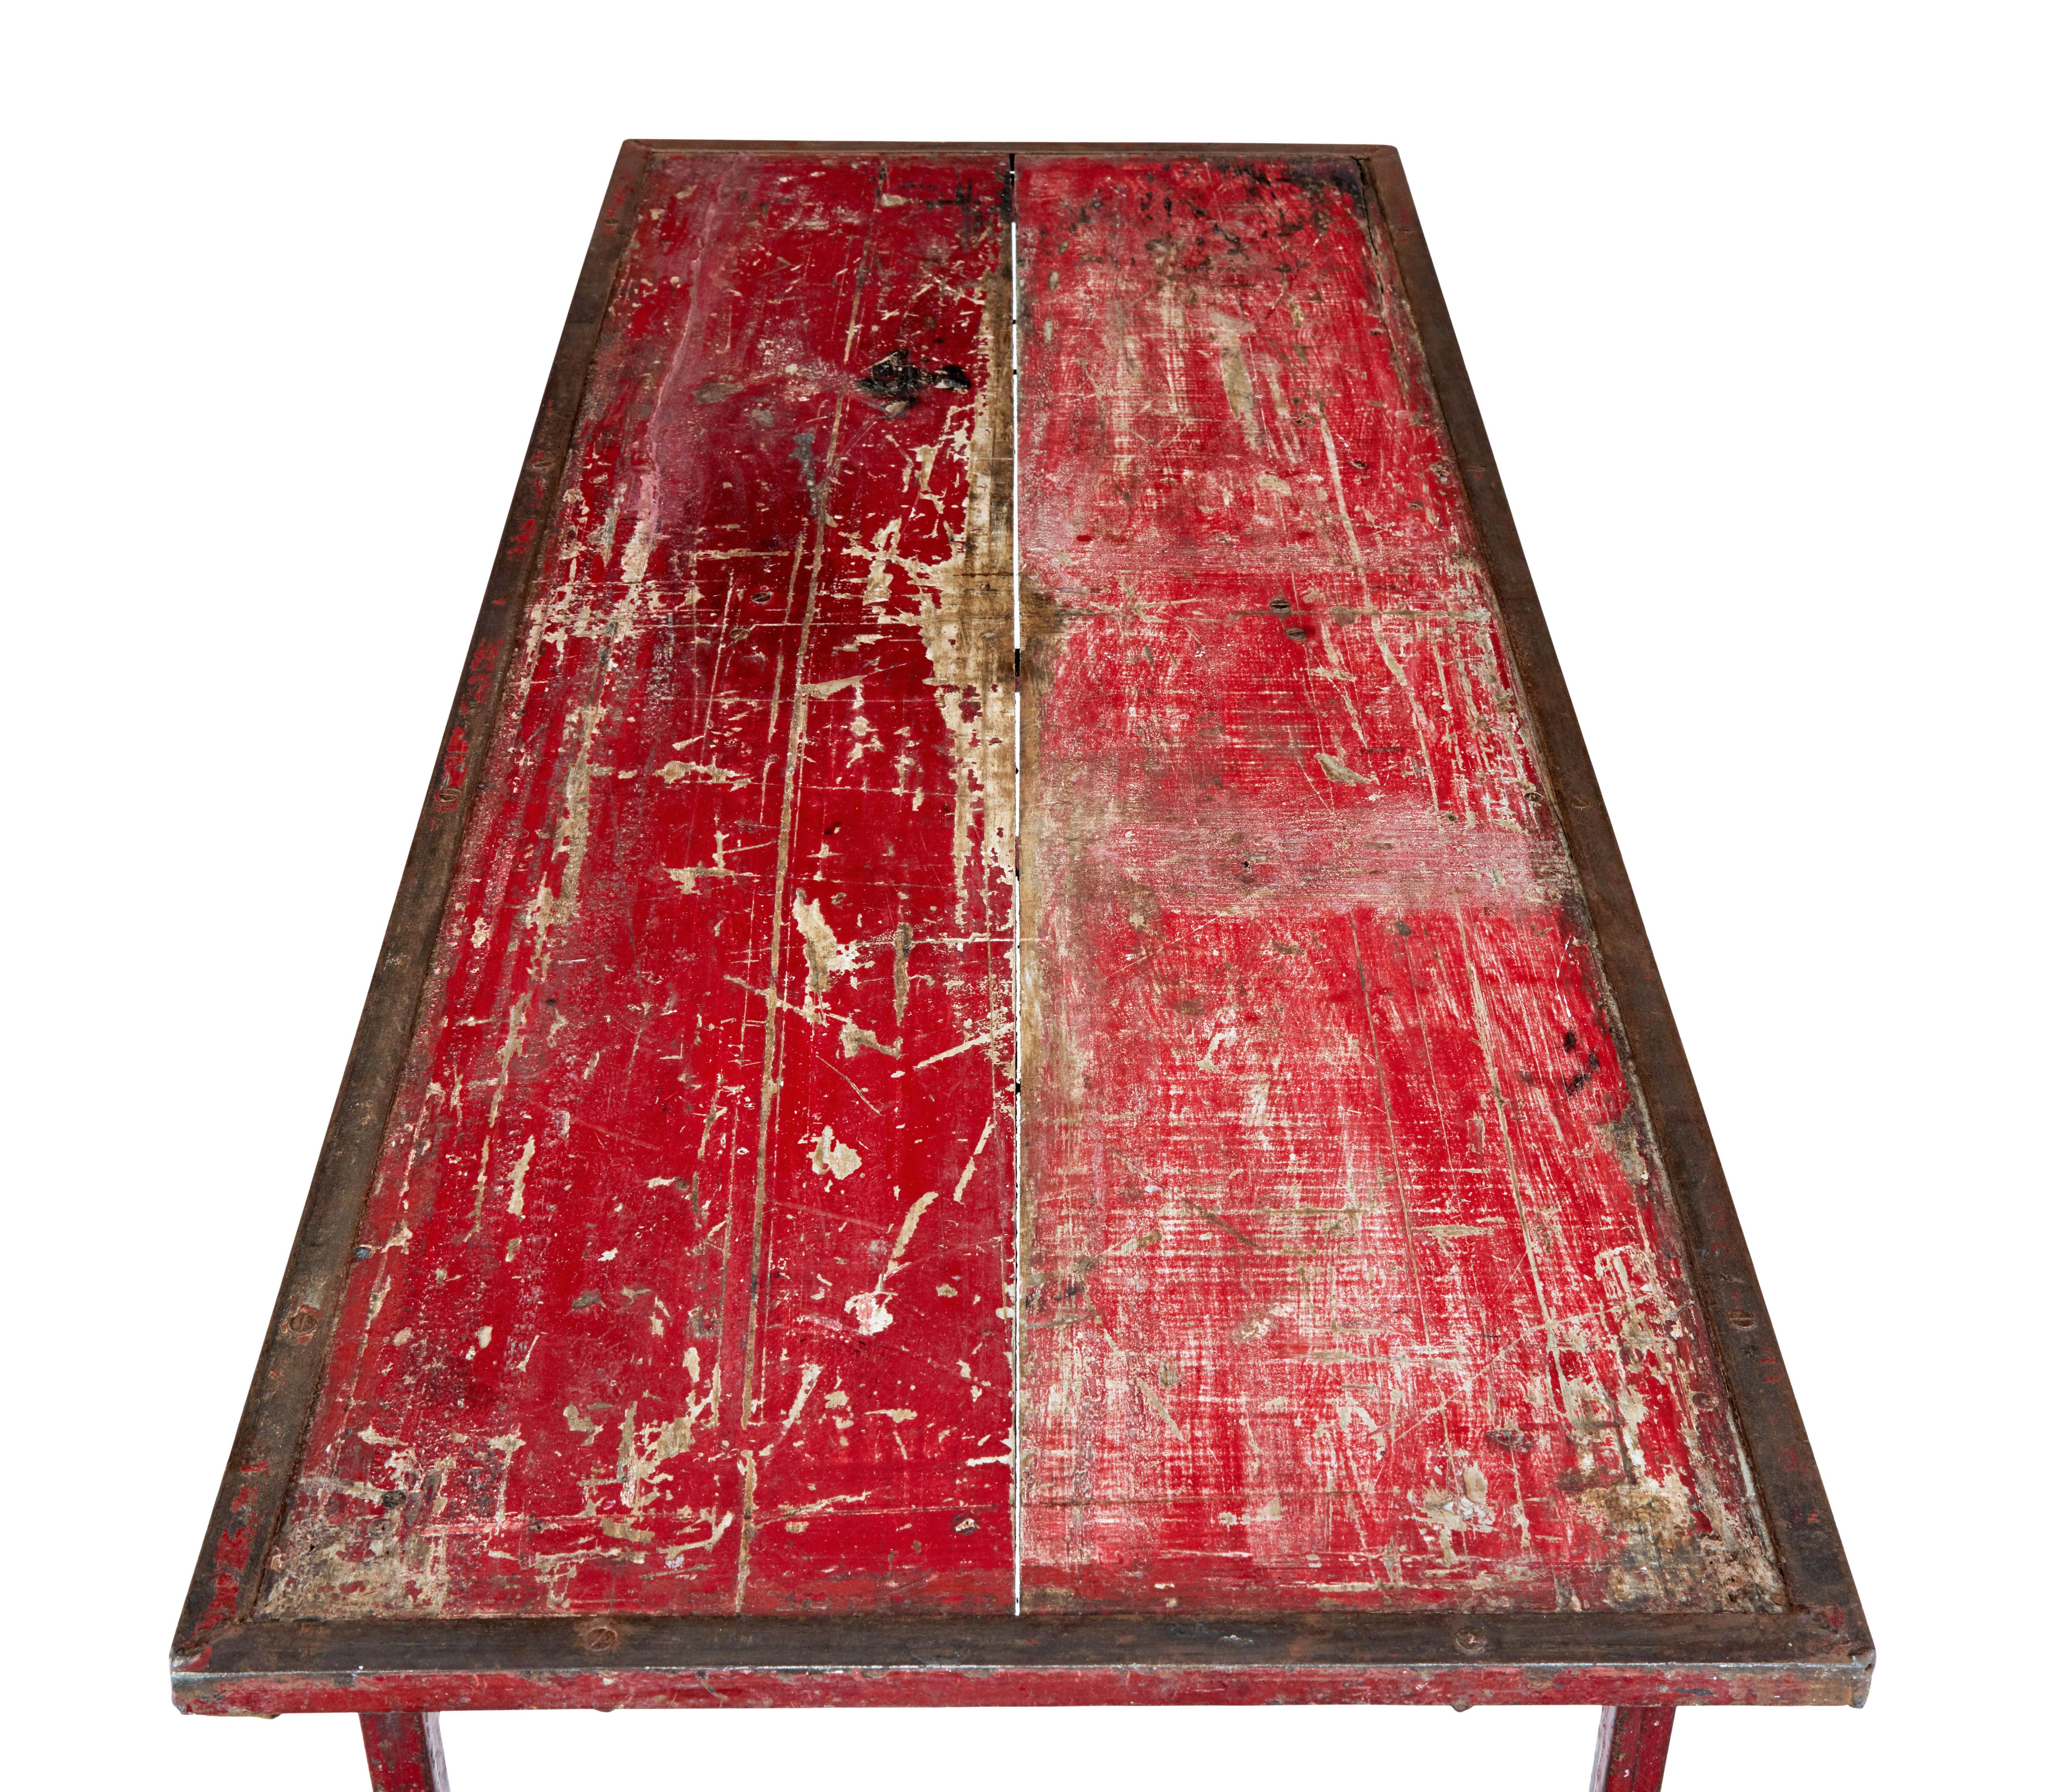 Hand-Crafted 1920s’ painted french pine and metal folding table